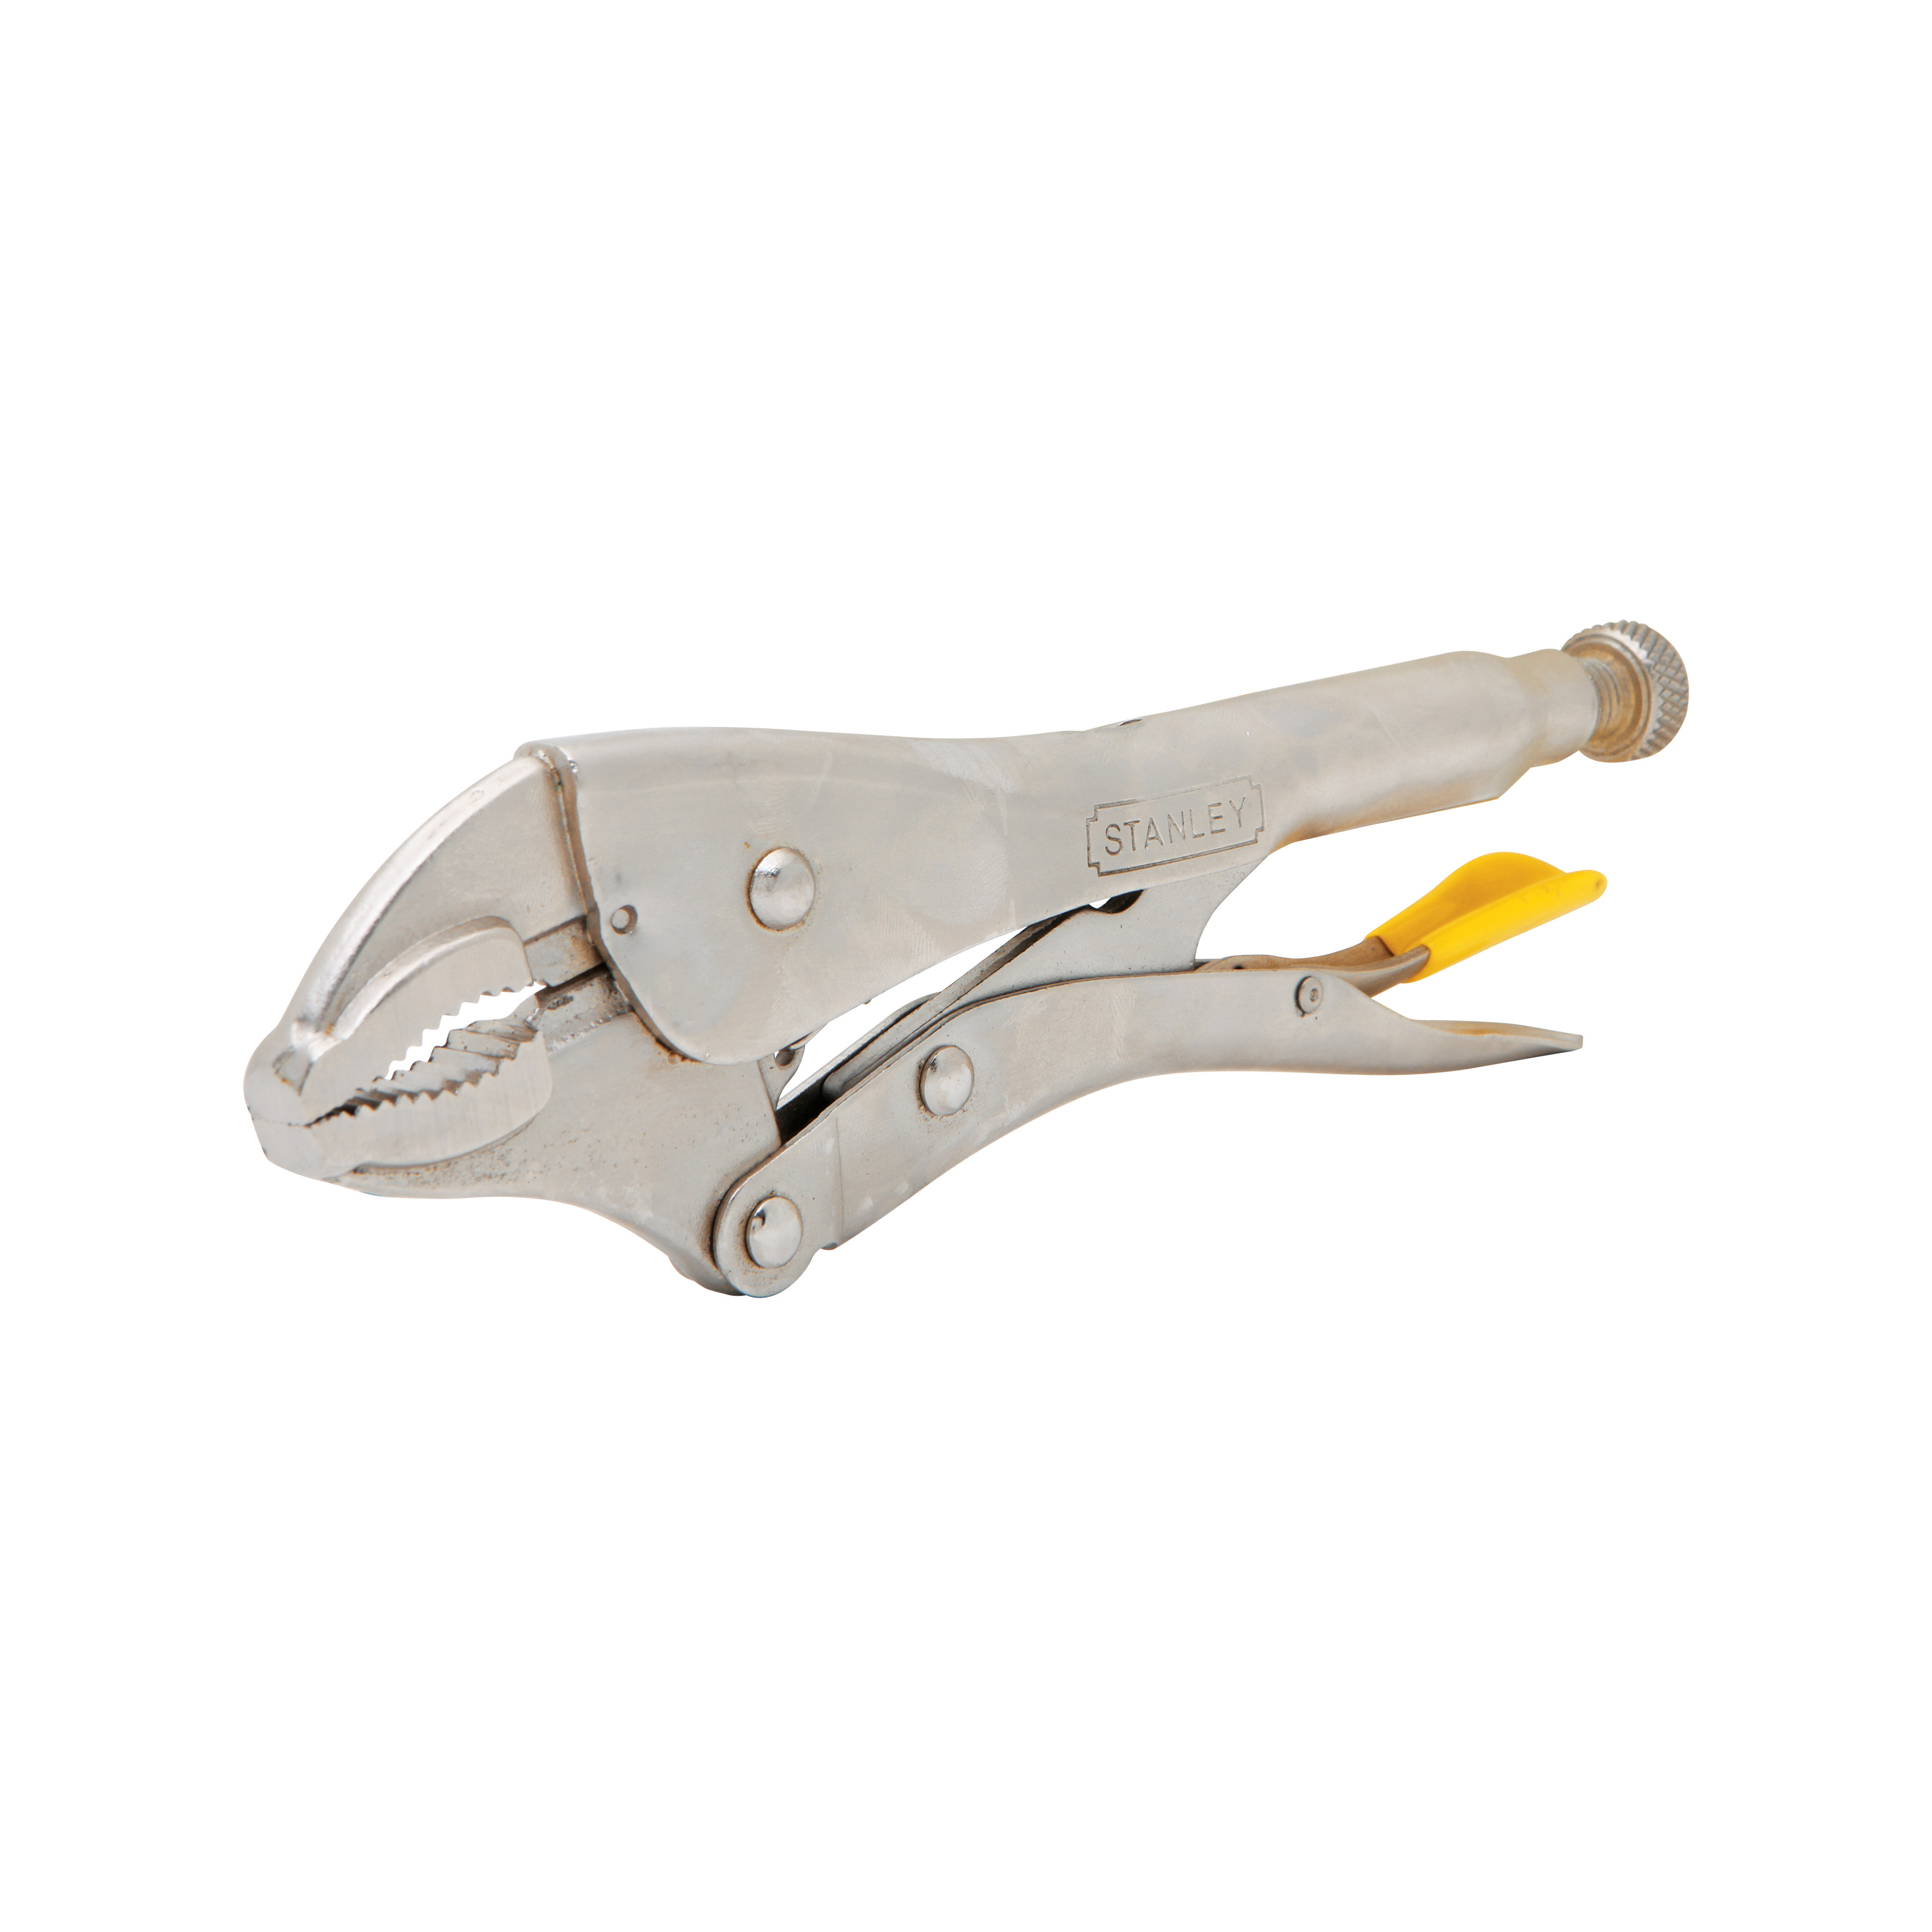 STANLEY 84-809 9-Inch Locking Pliers - image 3 of 4